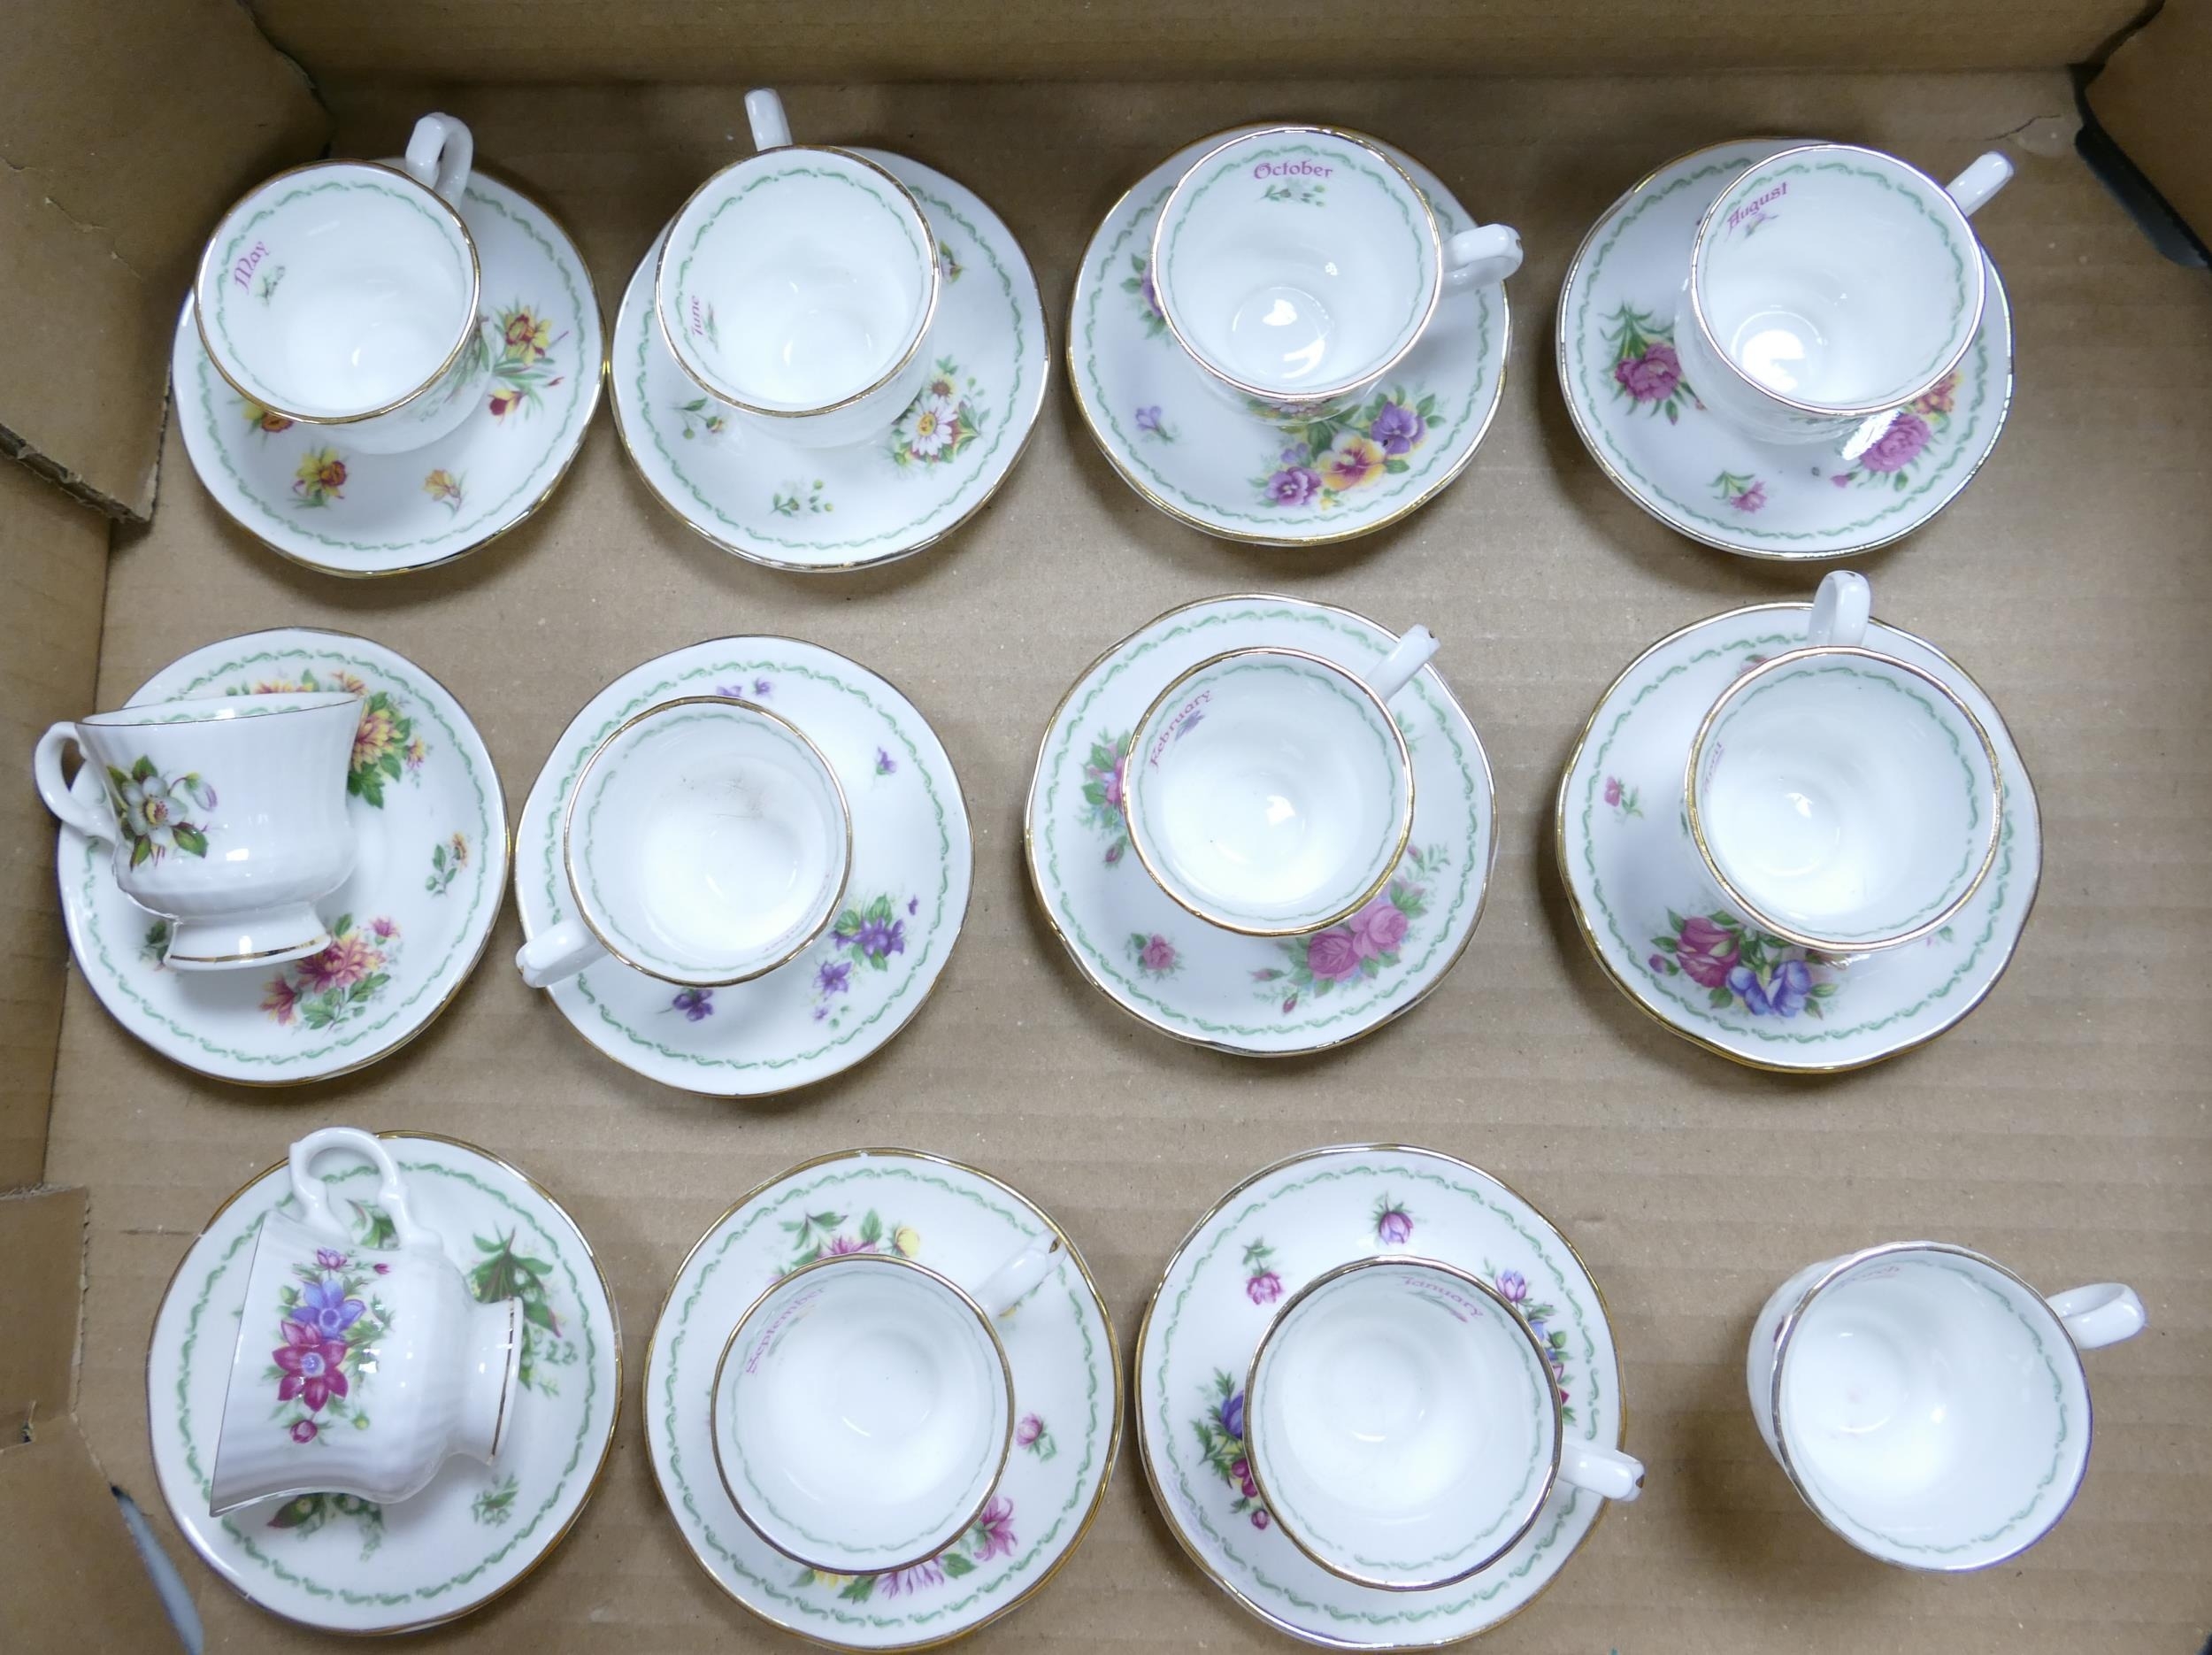 Queens China, A Miniature Set of Twelve Teacups representing the Months of the Year. One Saucer